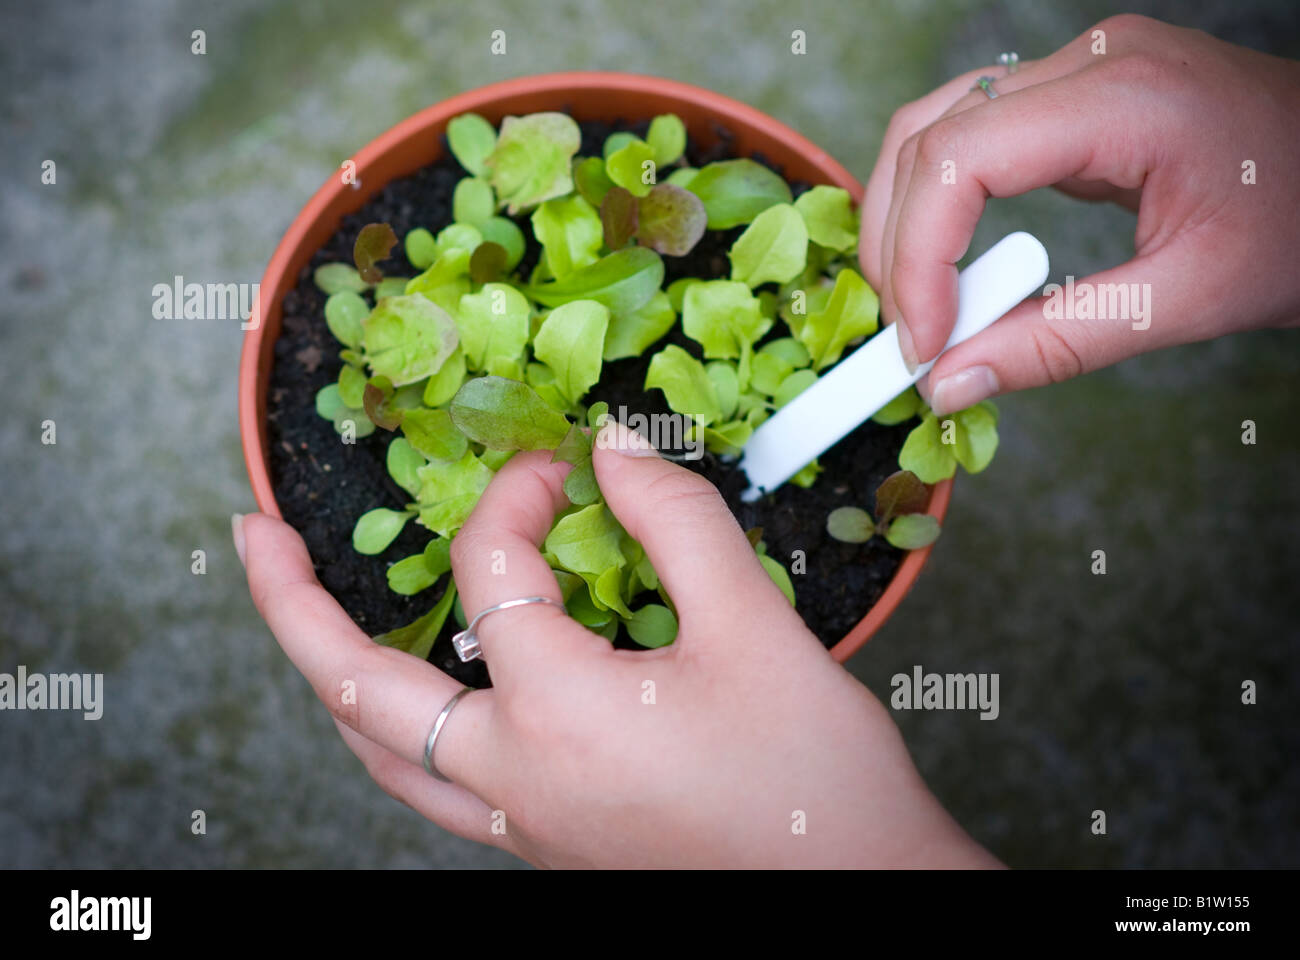 pricking out red and green lettuce from a plant pot Stock Photo